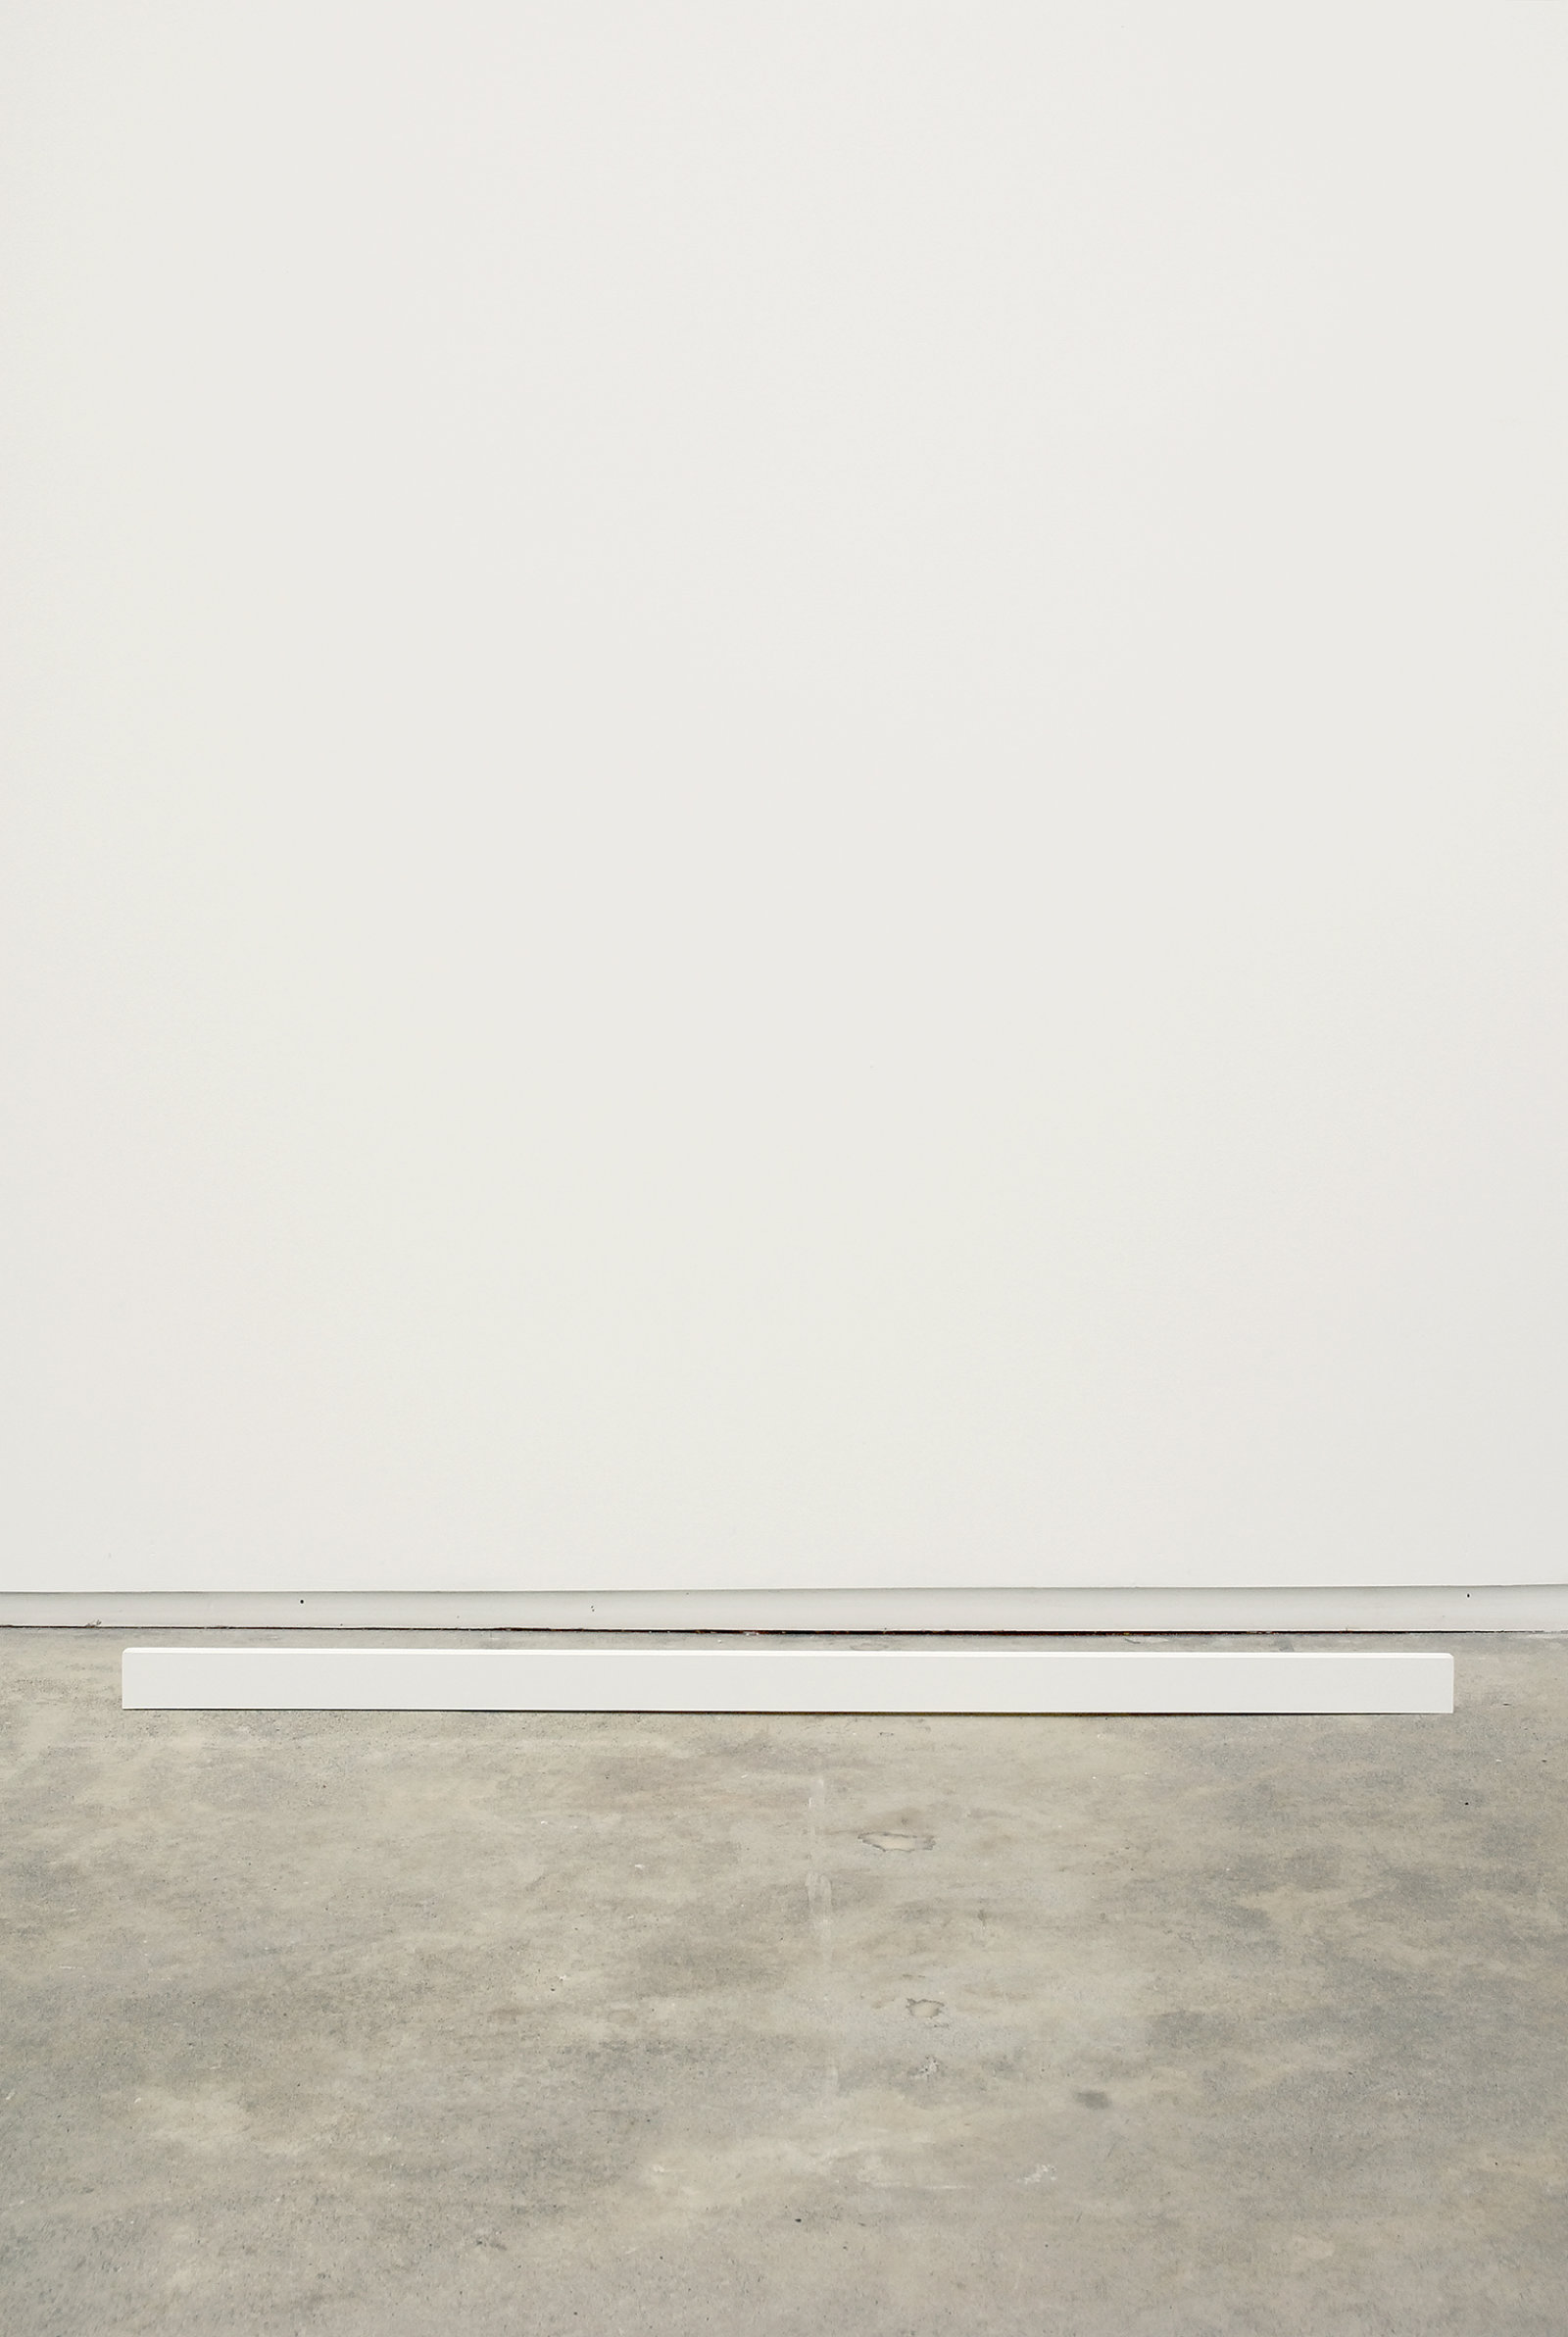 ​Arabella Campbell, The Reveal Works, 2007, c-prints and sculpture, dimensions variable by 